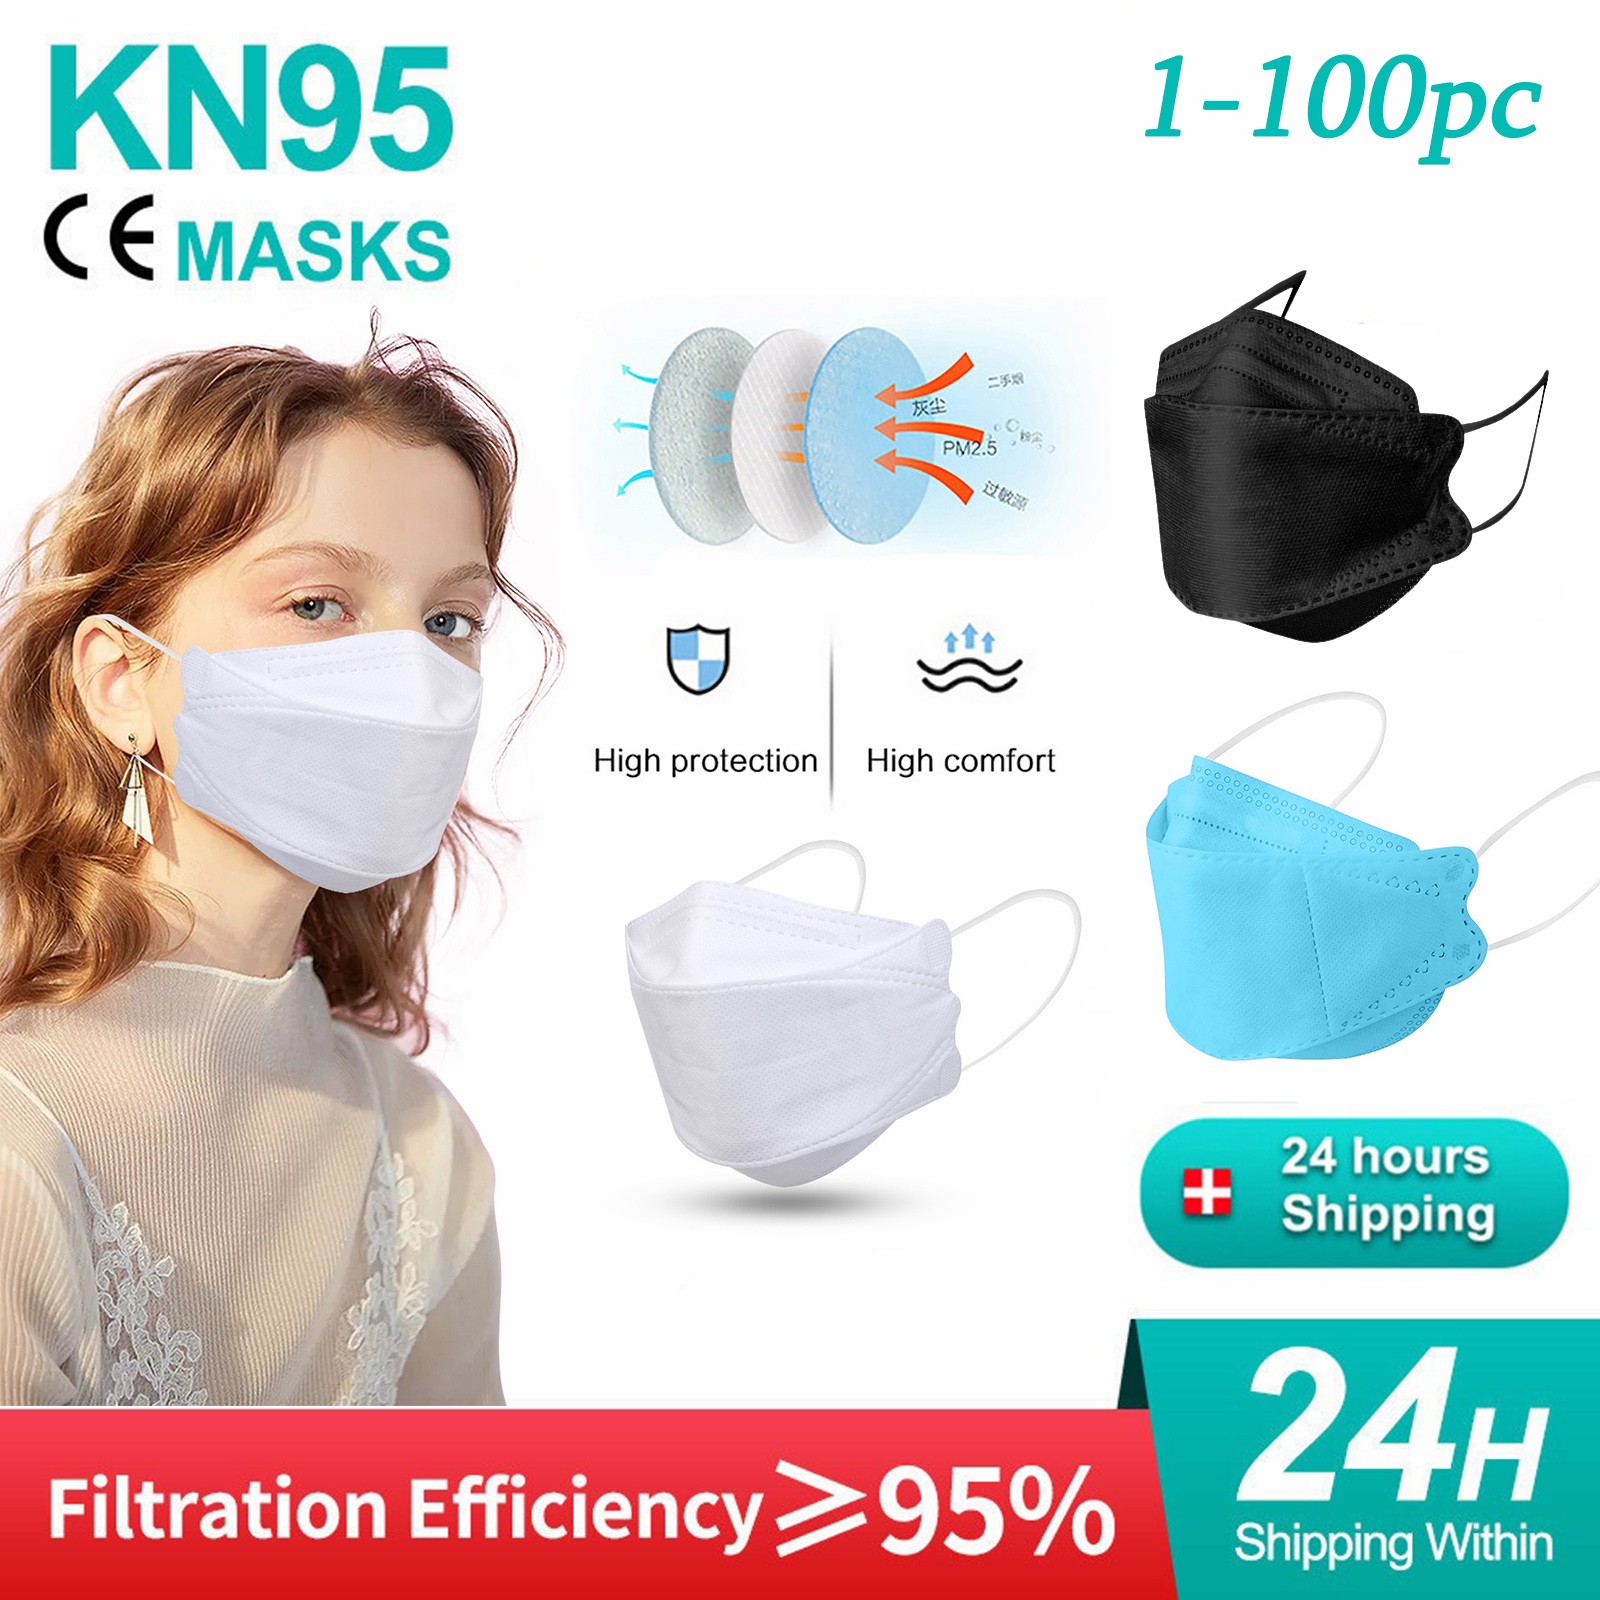 1-100pcs KN95 Face Mask Adult Black White Blue FFP2 CE Mask Drops and Fog Prevention Fish Non-woven mascarillas fpp2 mask